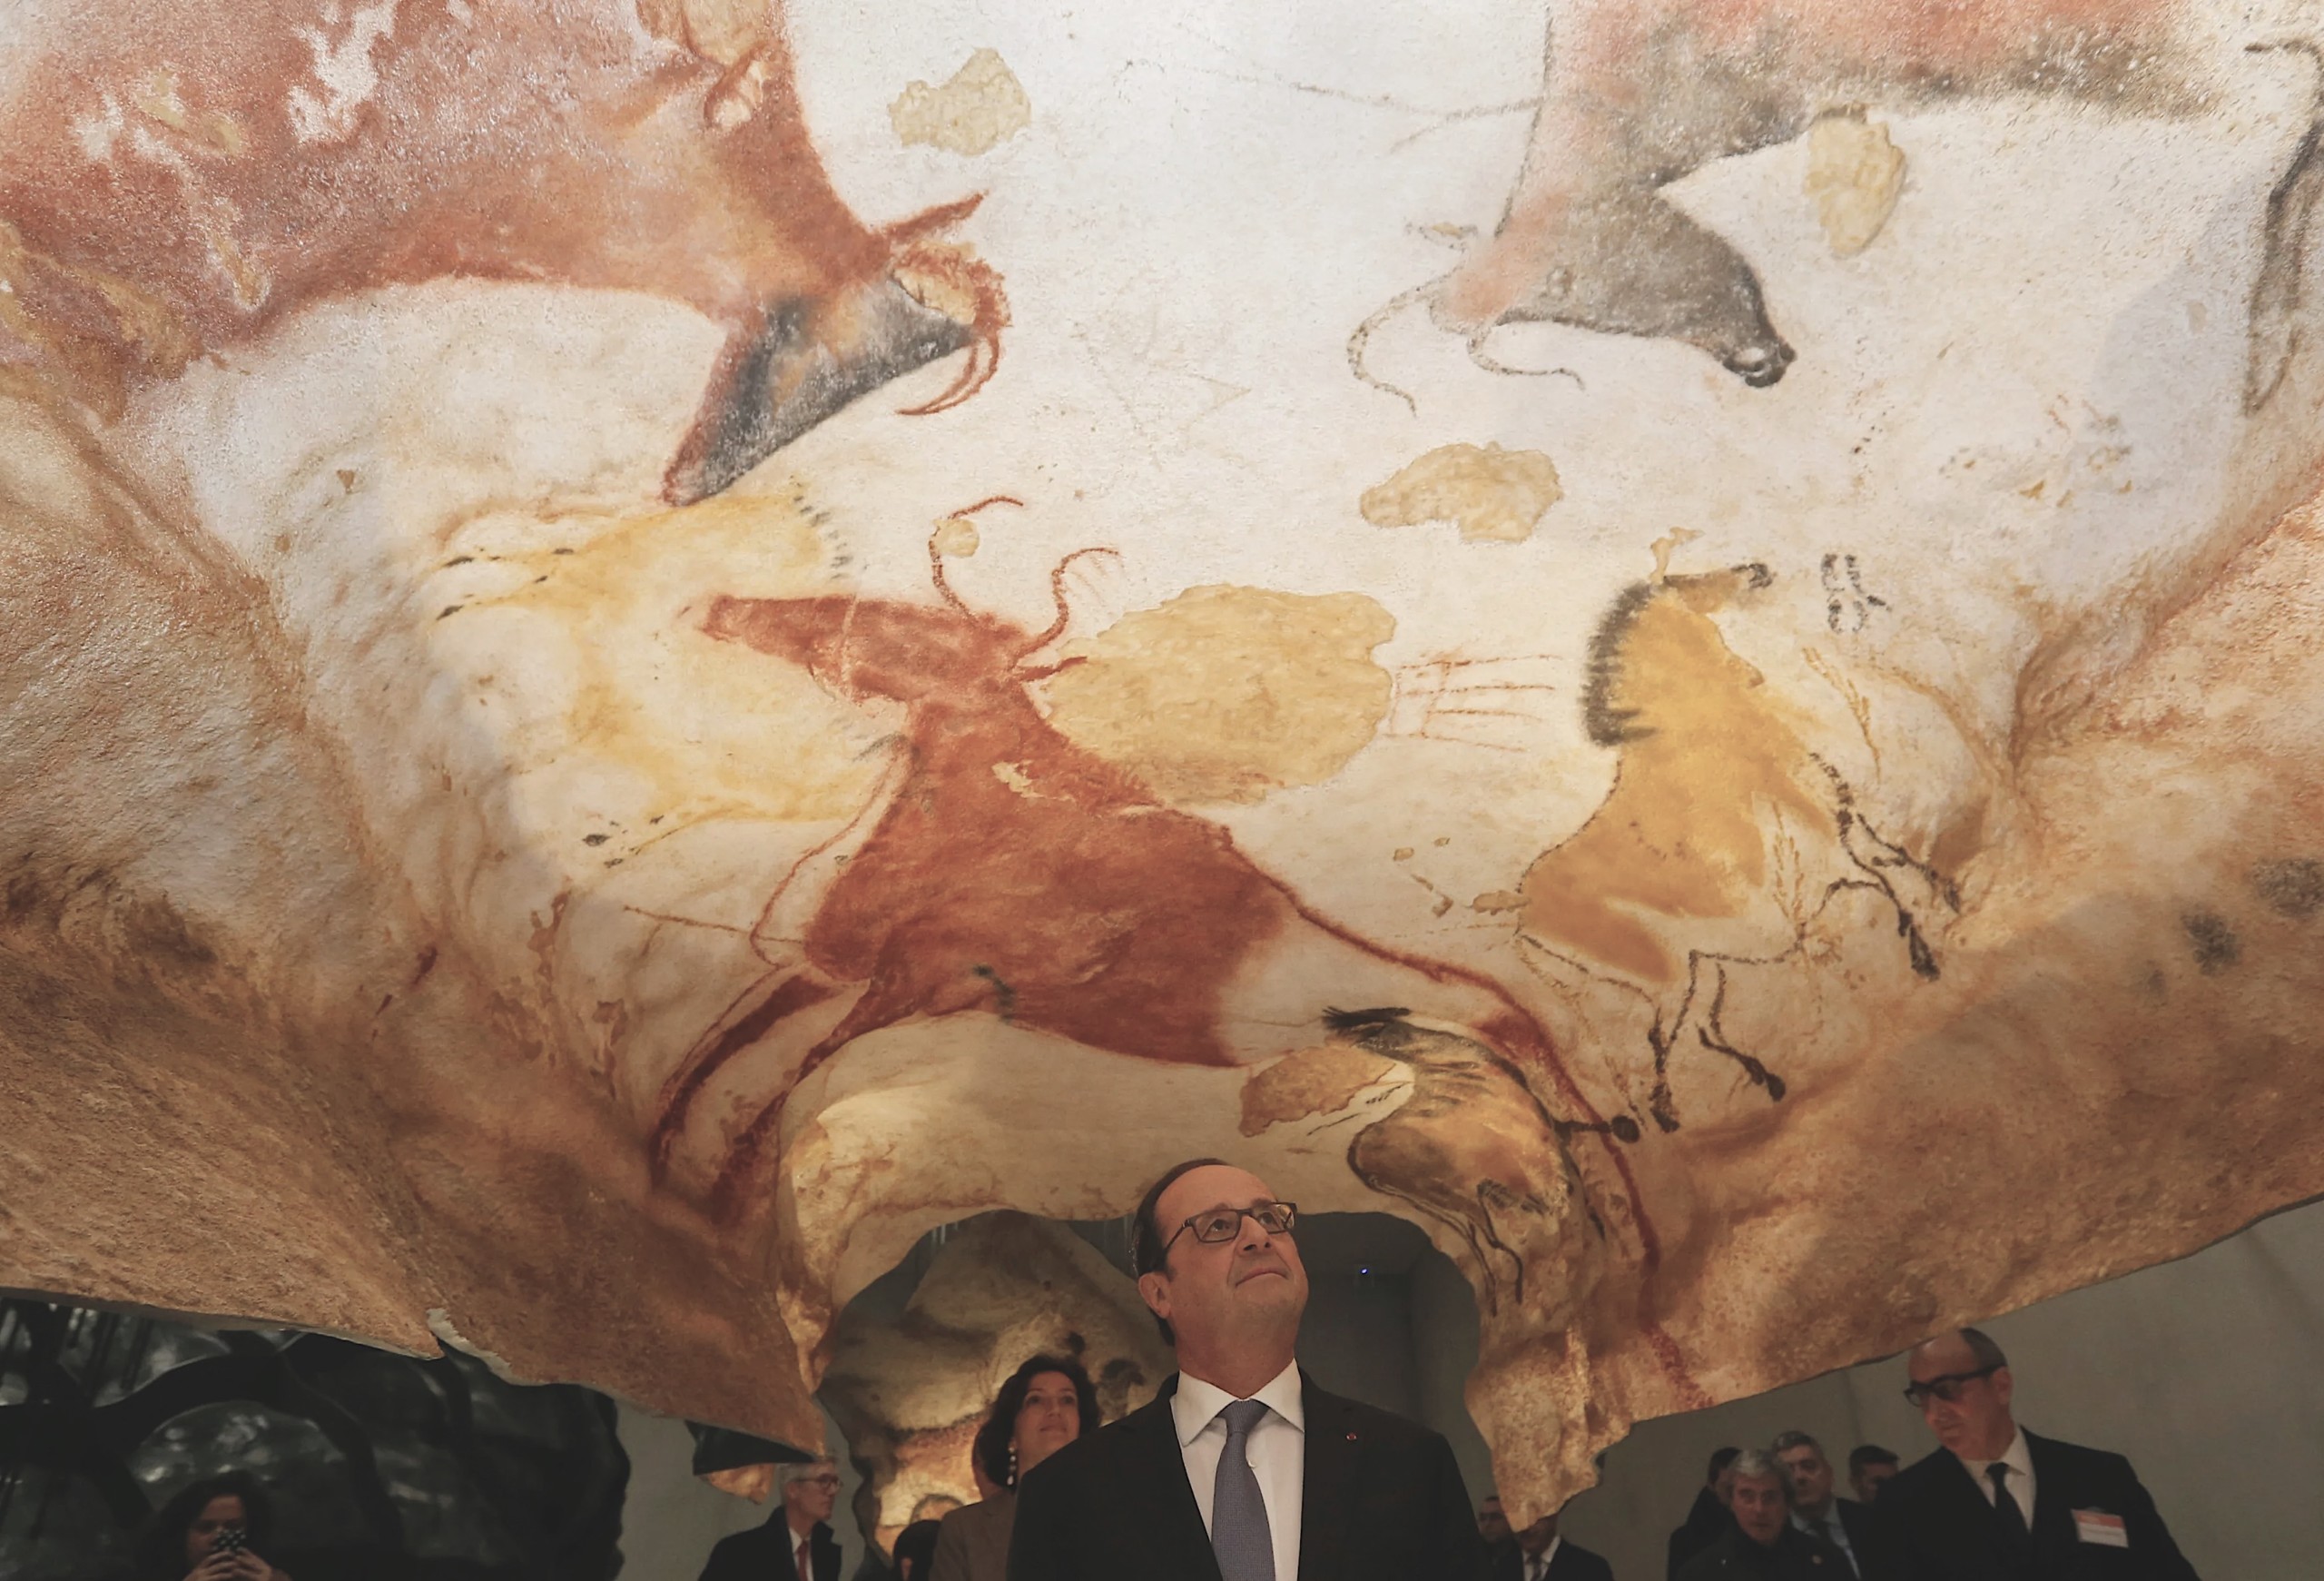 business man admiring cave drawings, the first example of visual storytelling